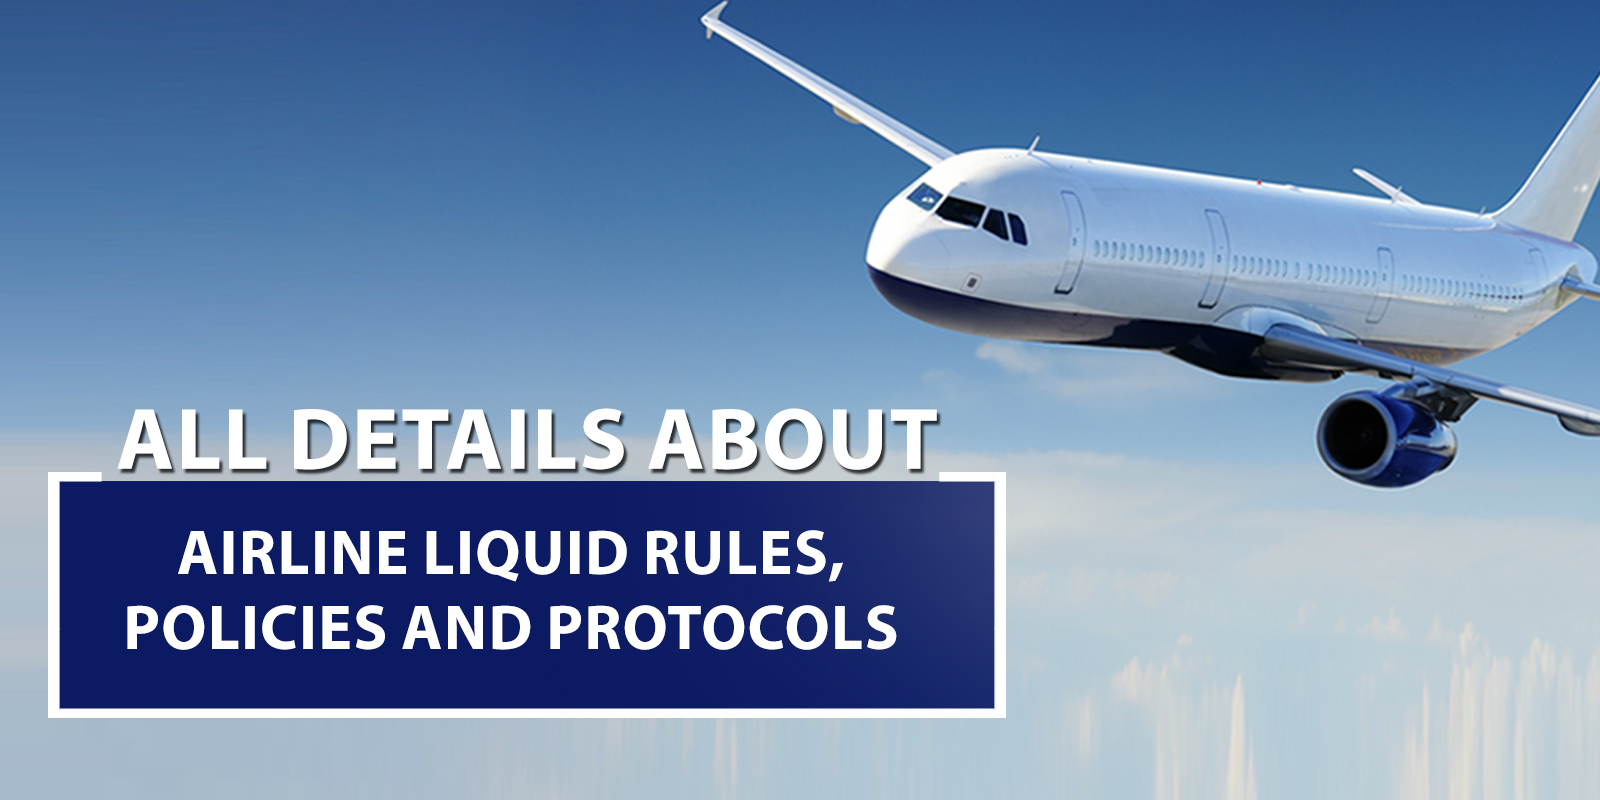 All Details About Airline Liquid Rules, Policies and Protocols - Flyopedia Blog